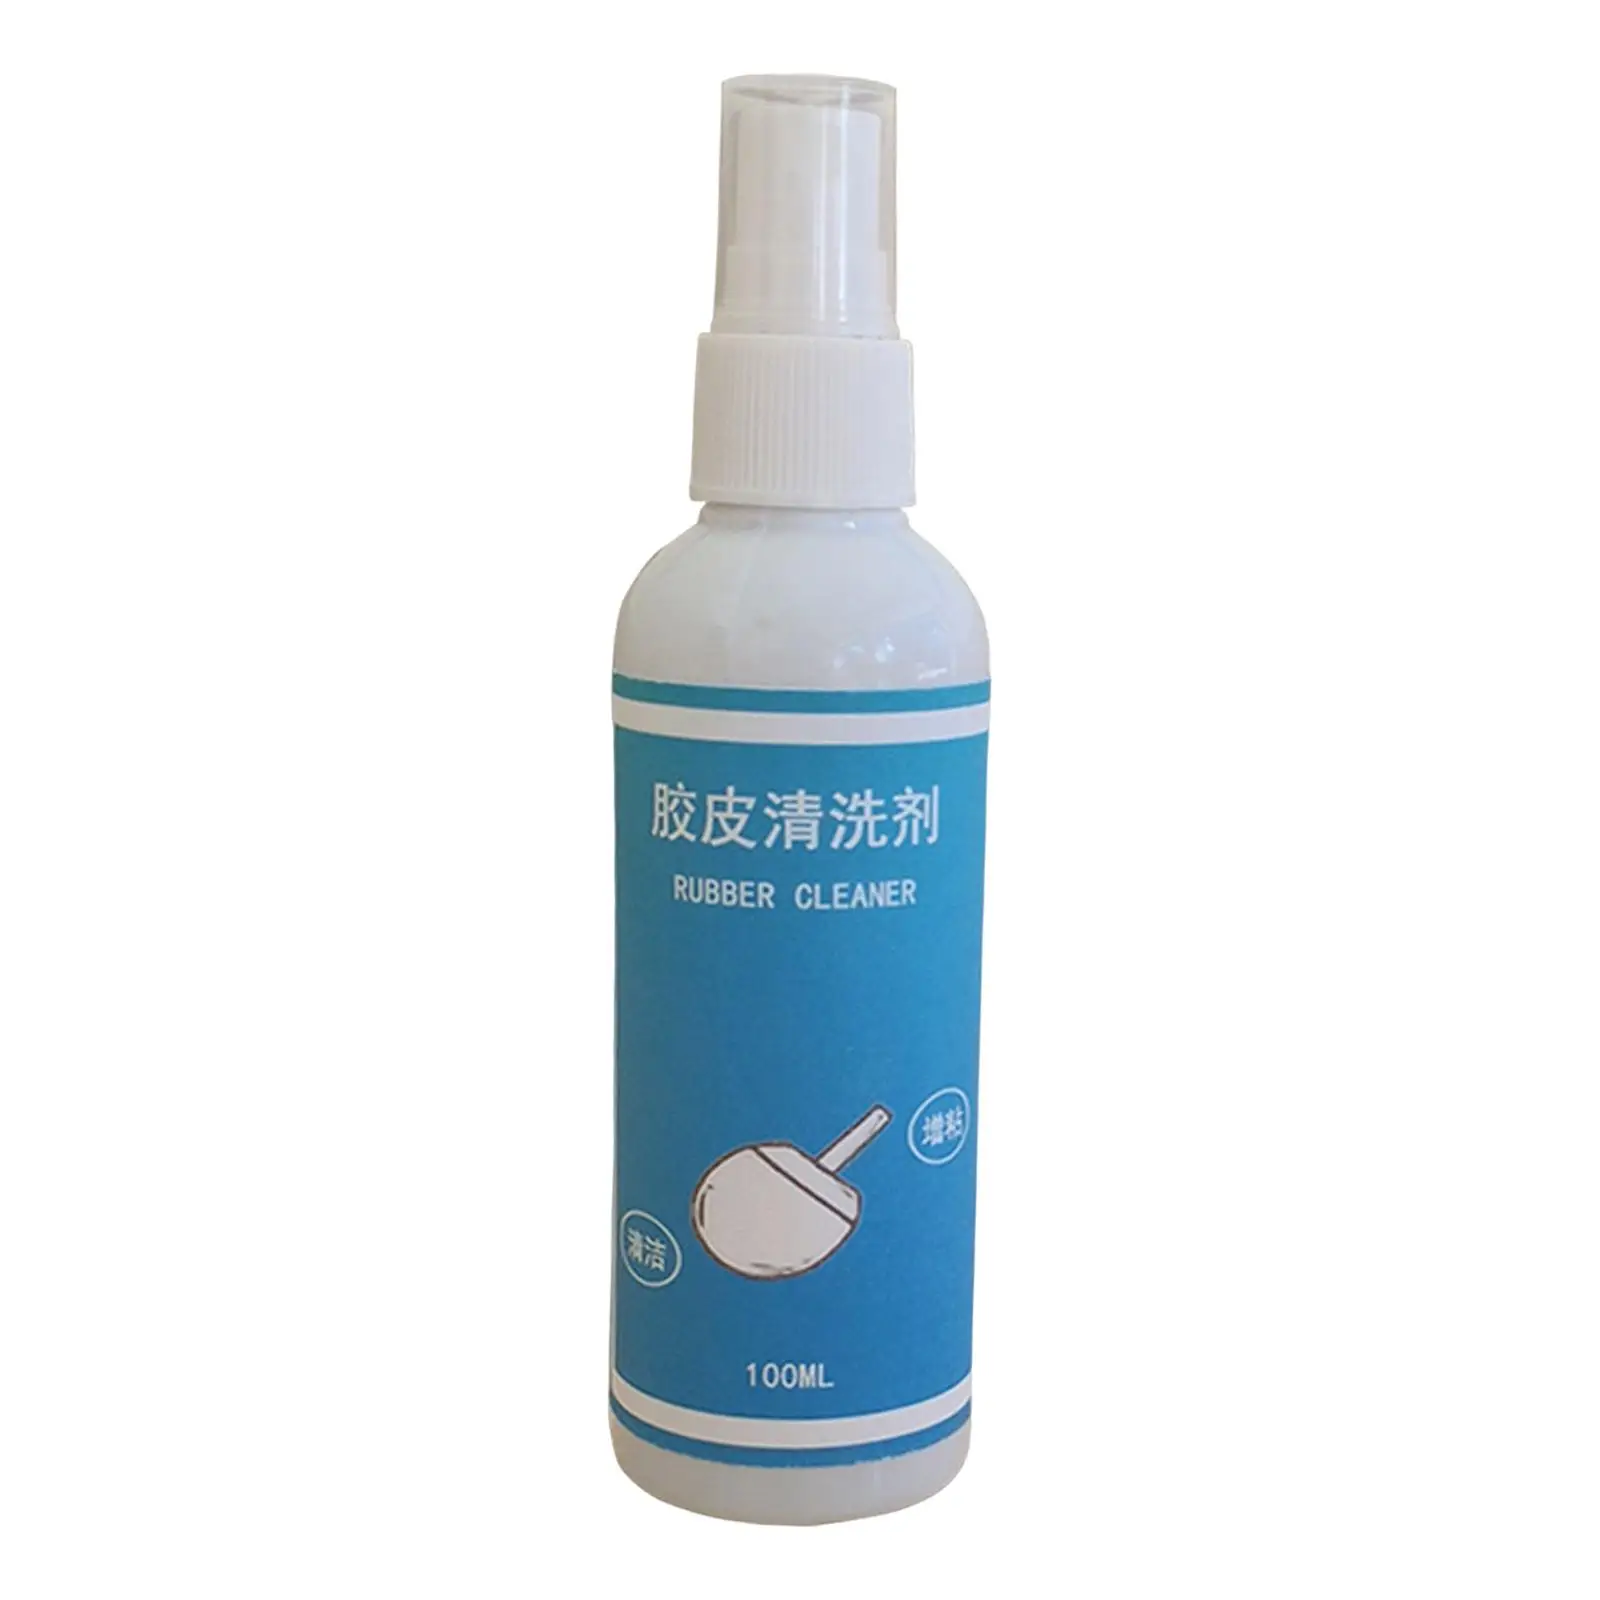 Table Tennis Rubber Cleaner Cleaning Spray 100ml Spray Bottle Detergent Care